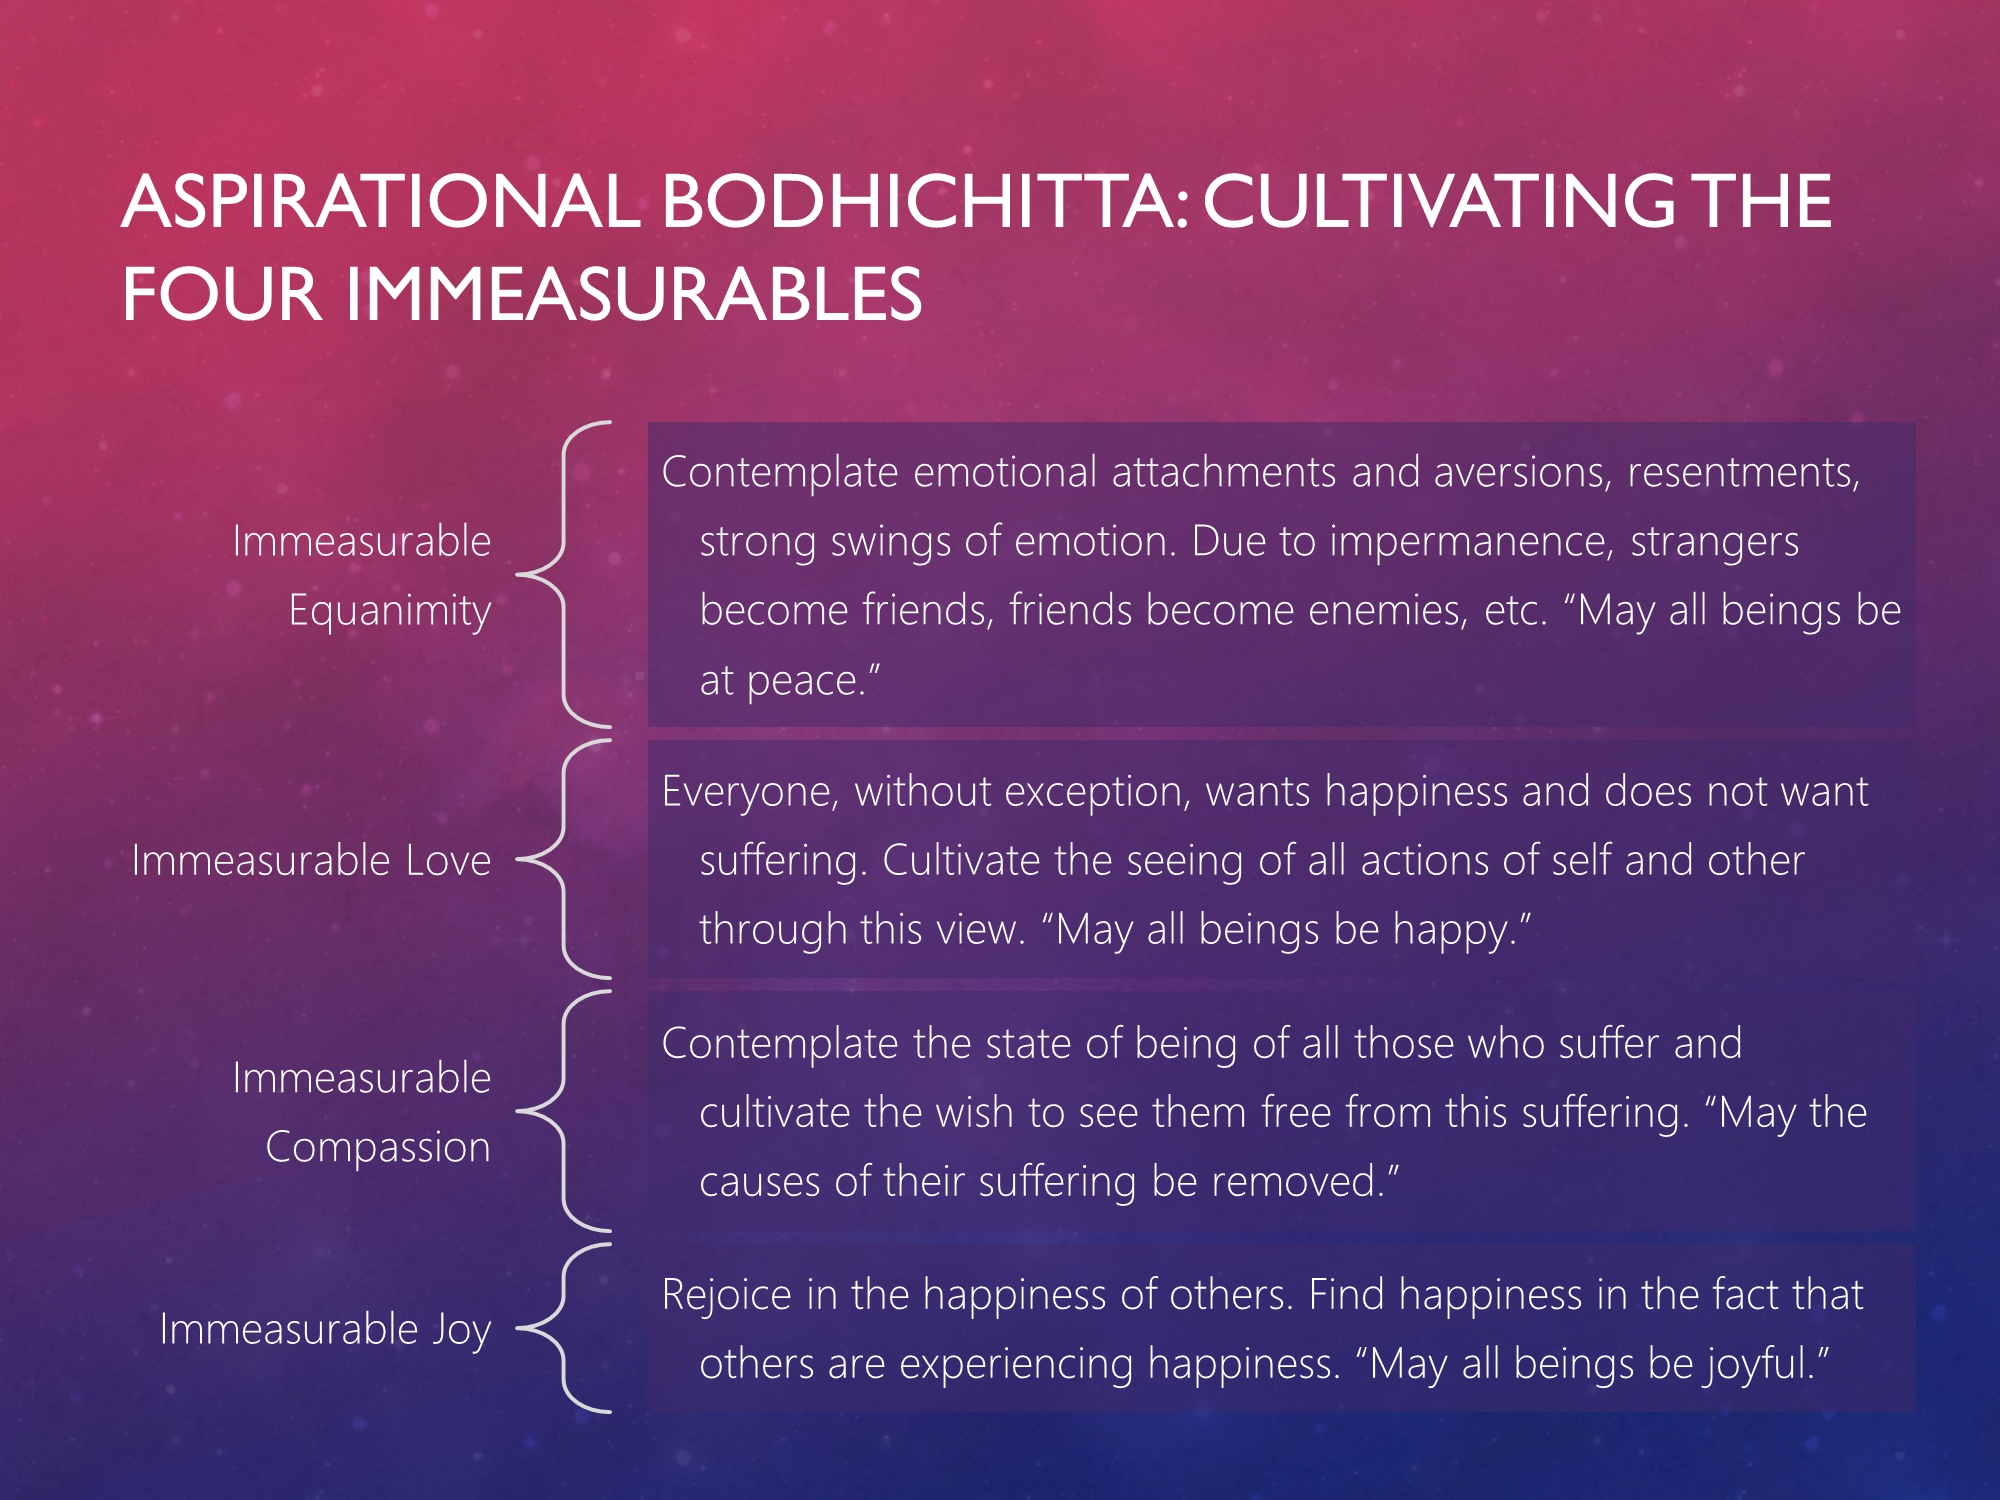 Aspirational Bodhichitta: Cultivating the four Immeasurables